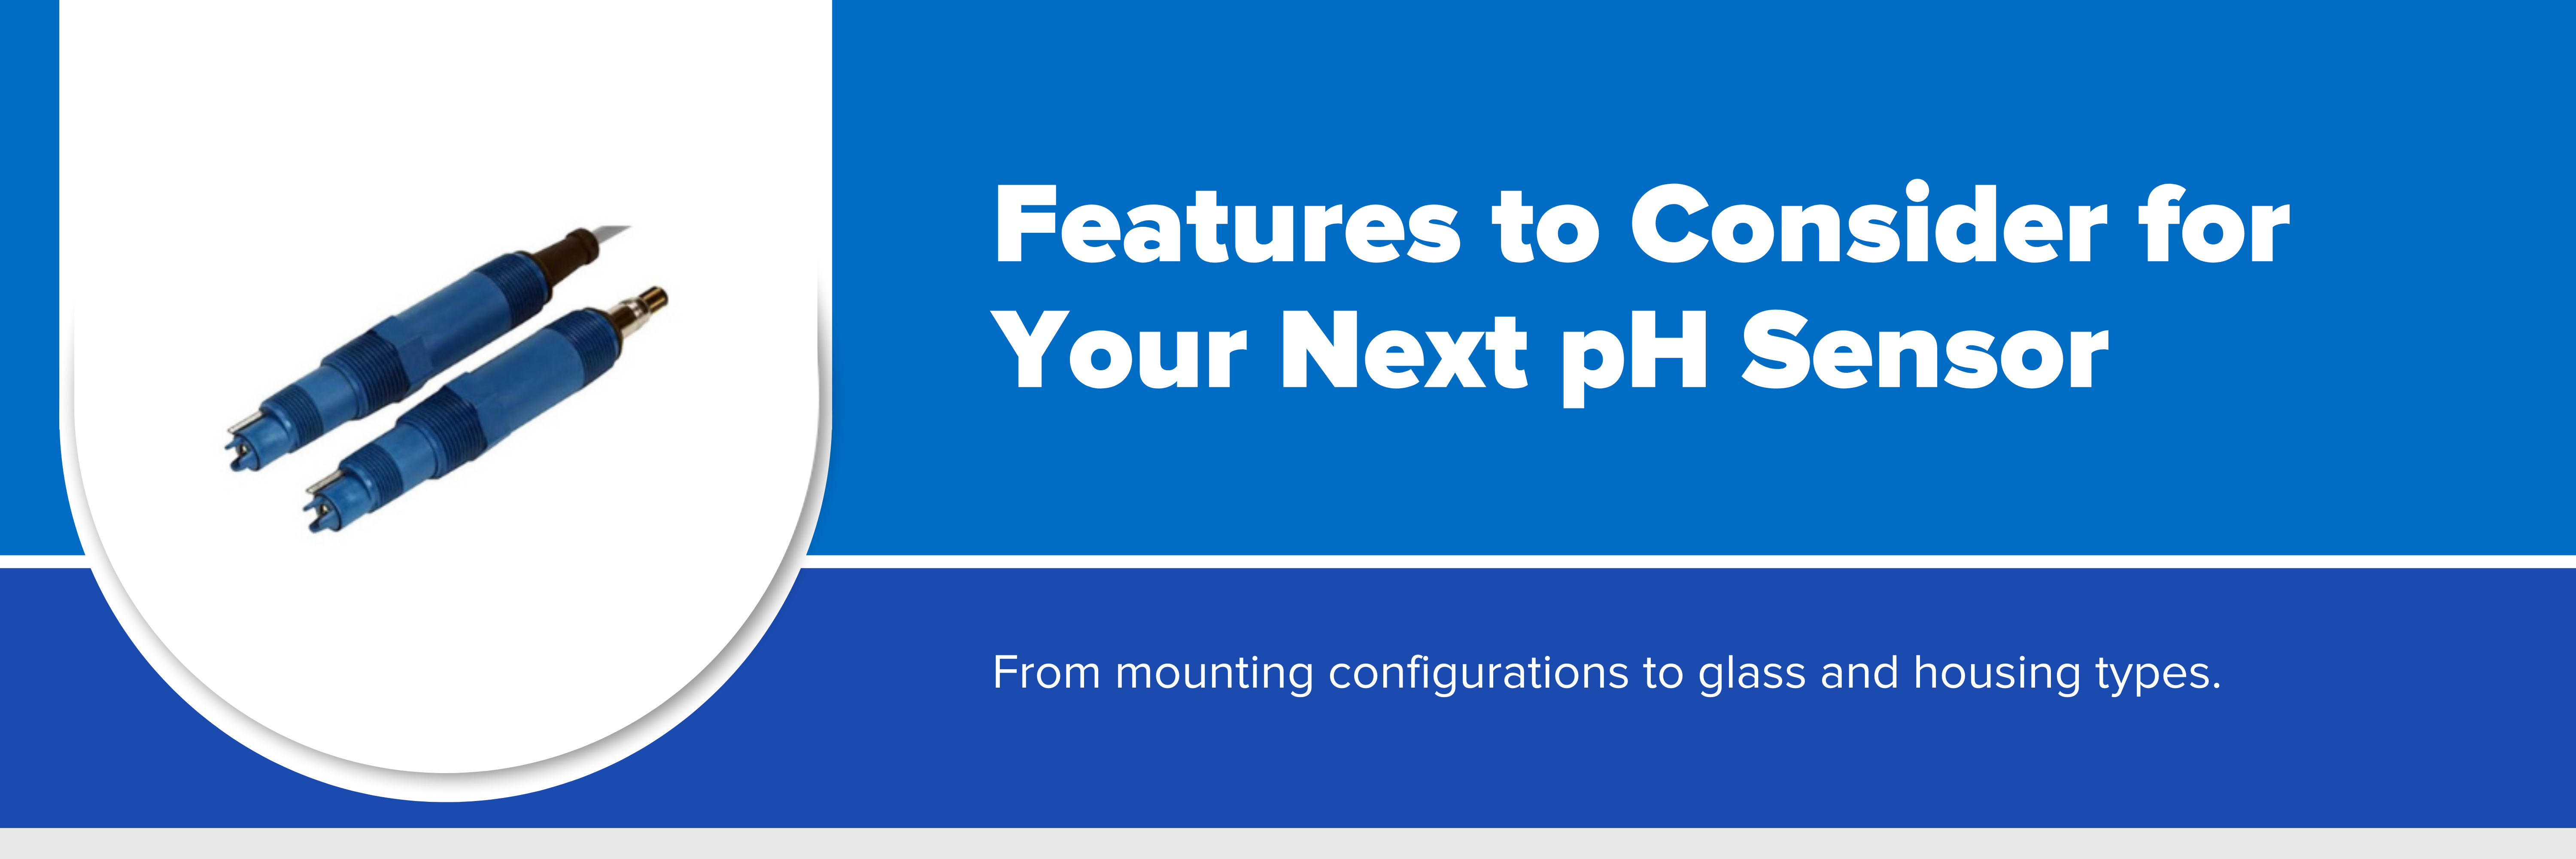 Header image with text 'features to consider for your next pH sensor'.